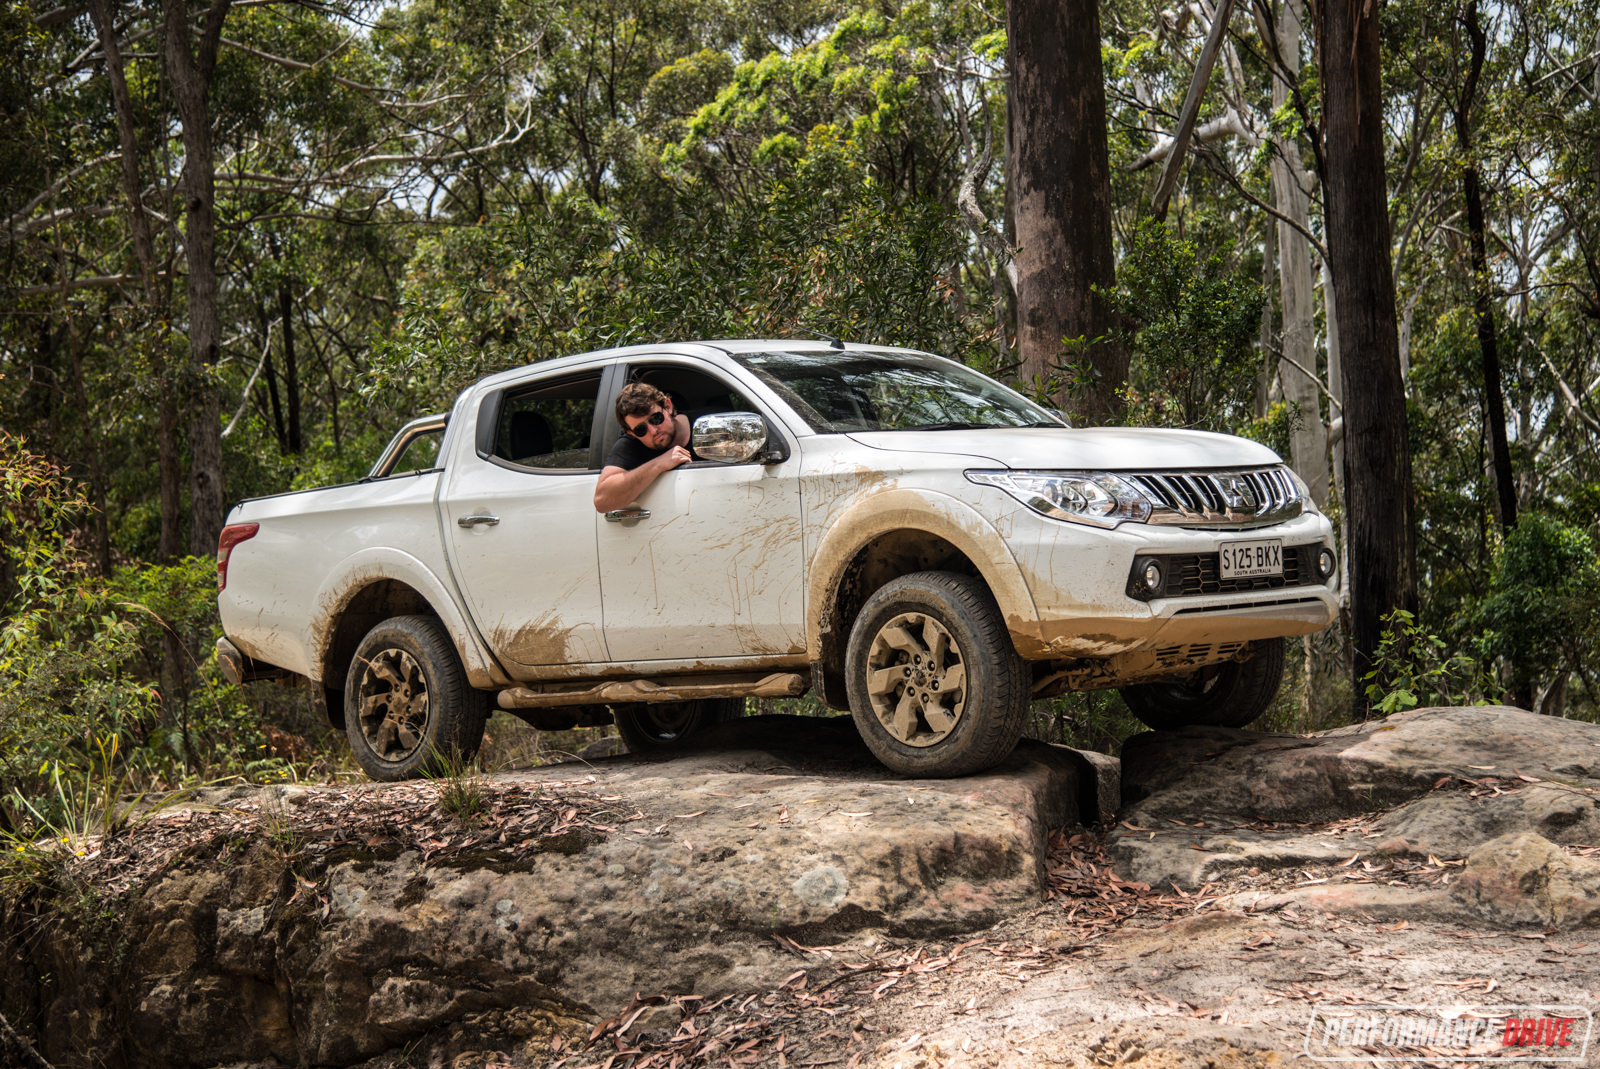 2016 Mitsubishi Triton Exceed review: Off-road test (video)